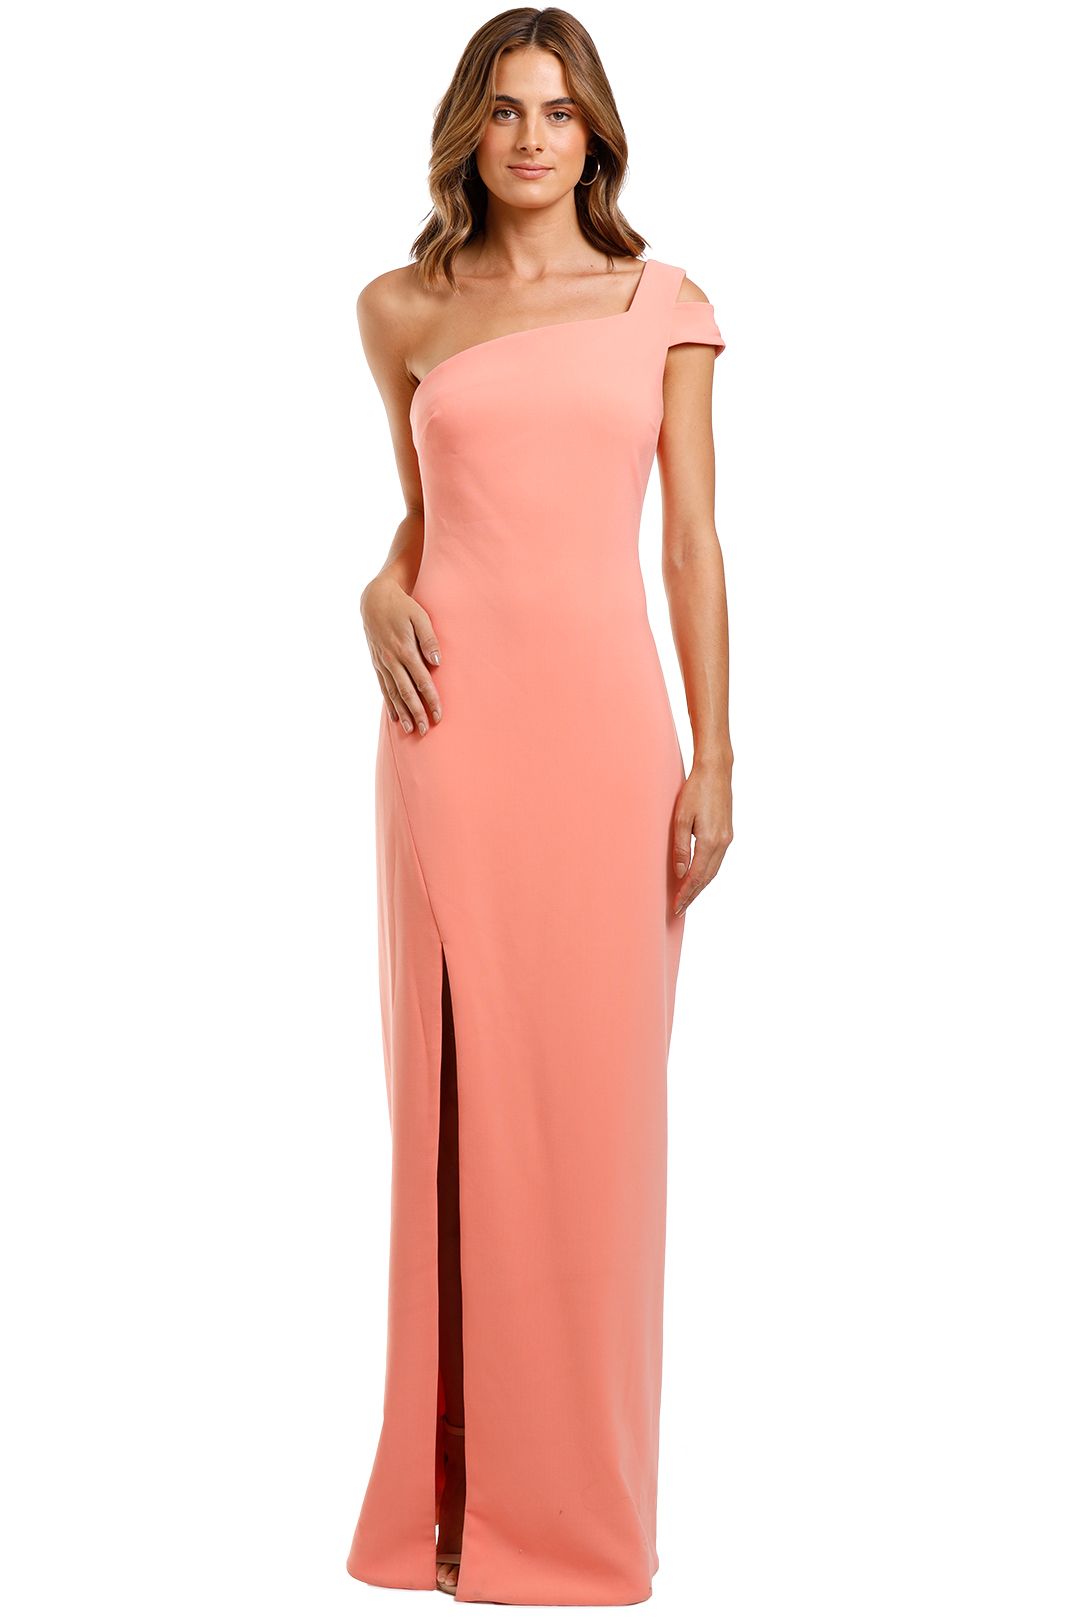 Likely NYC Maxson Gown Apricot